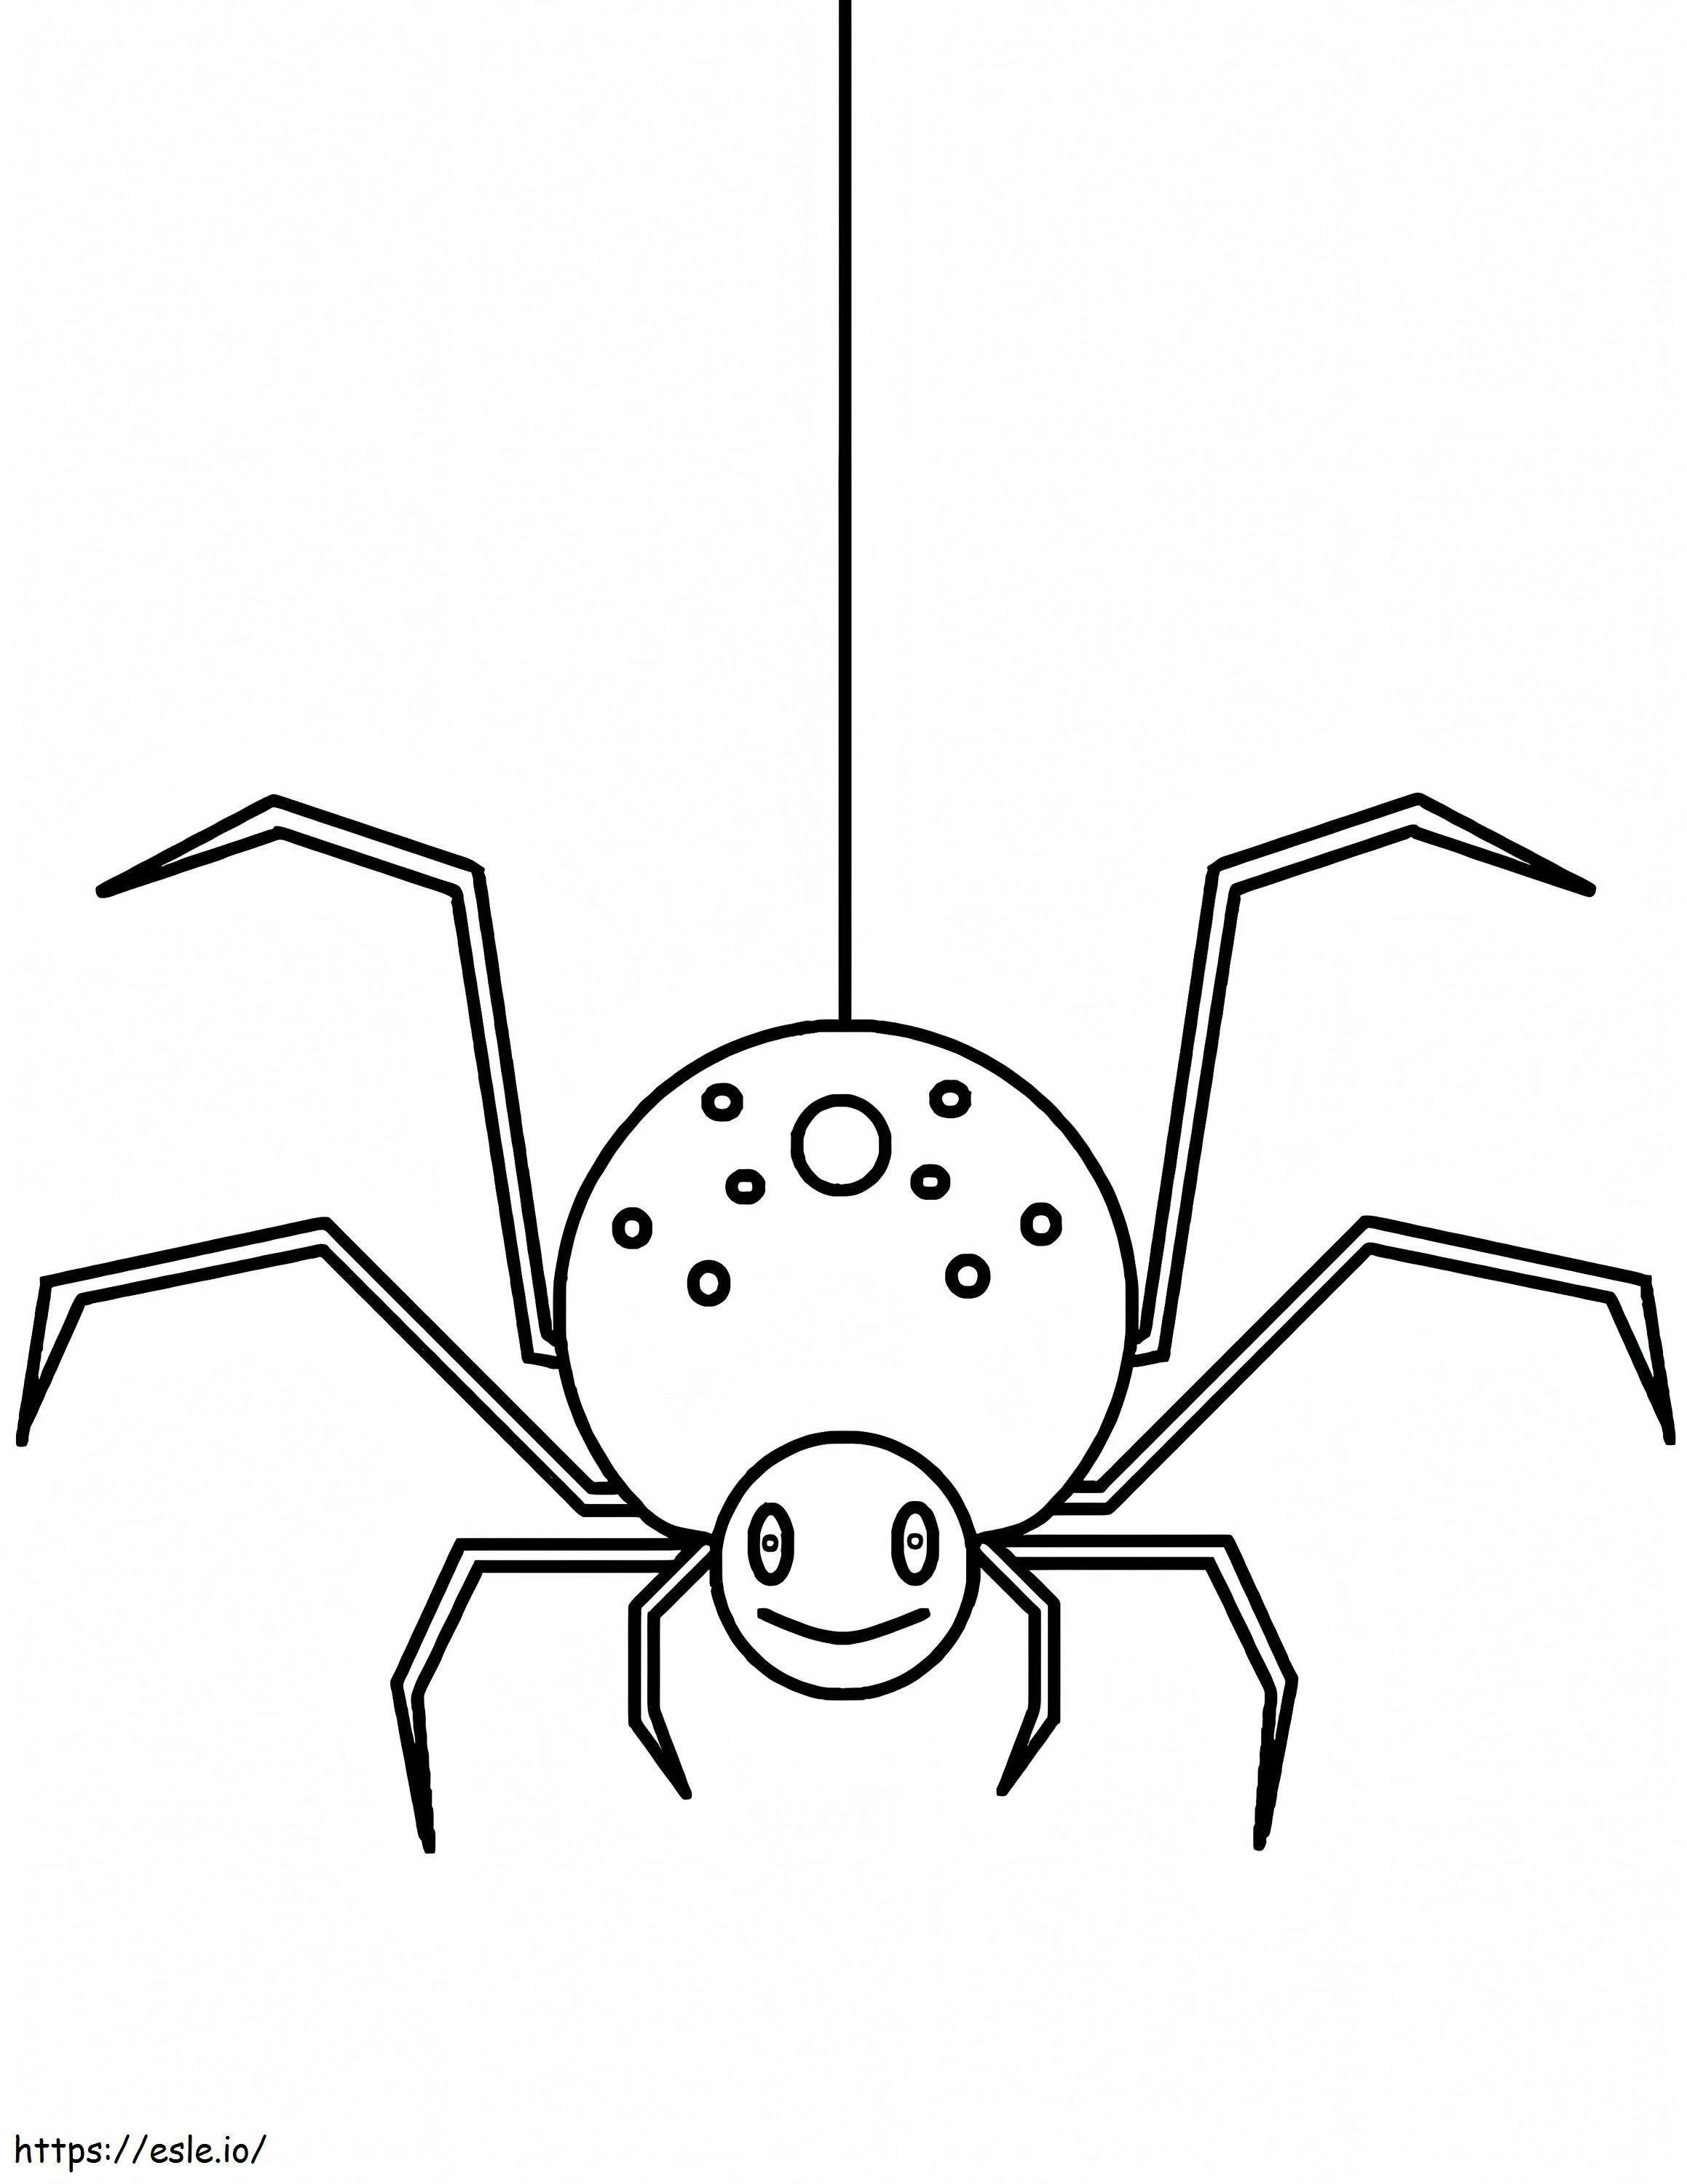 Easy Spider coloring page